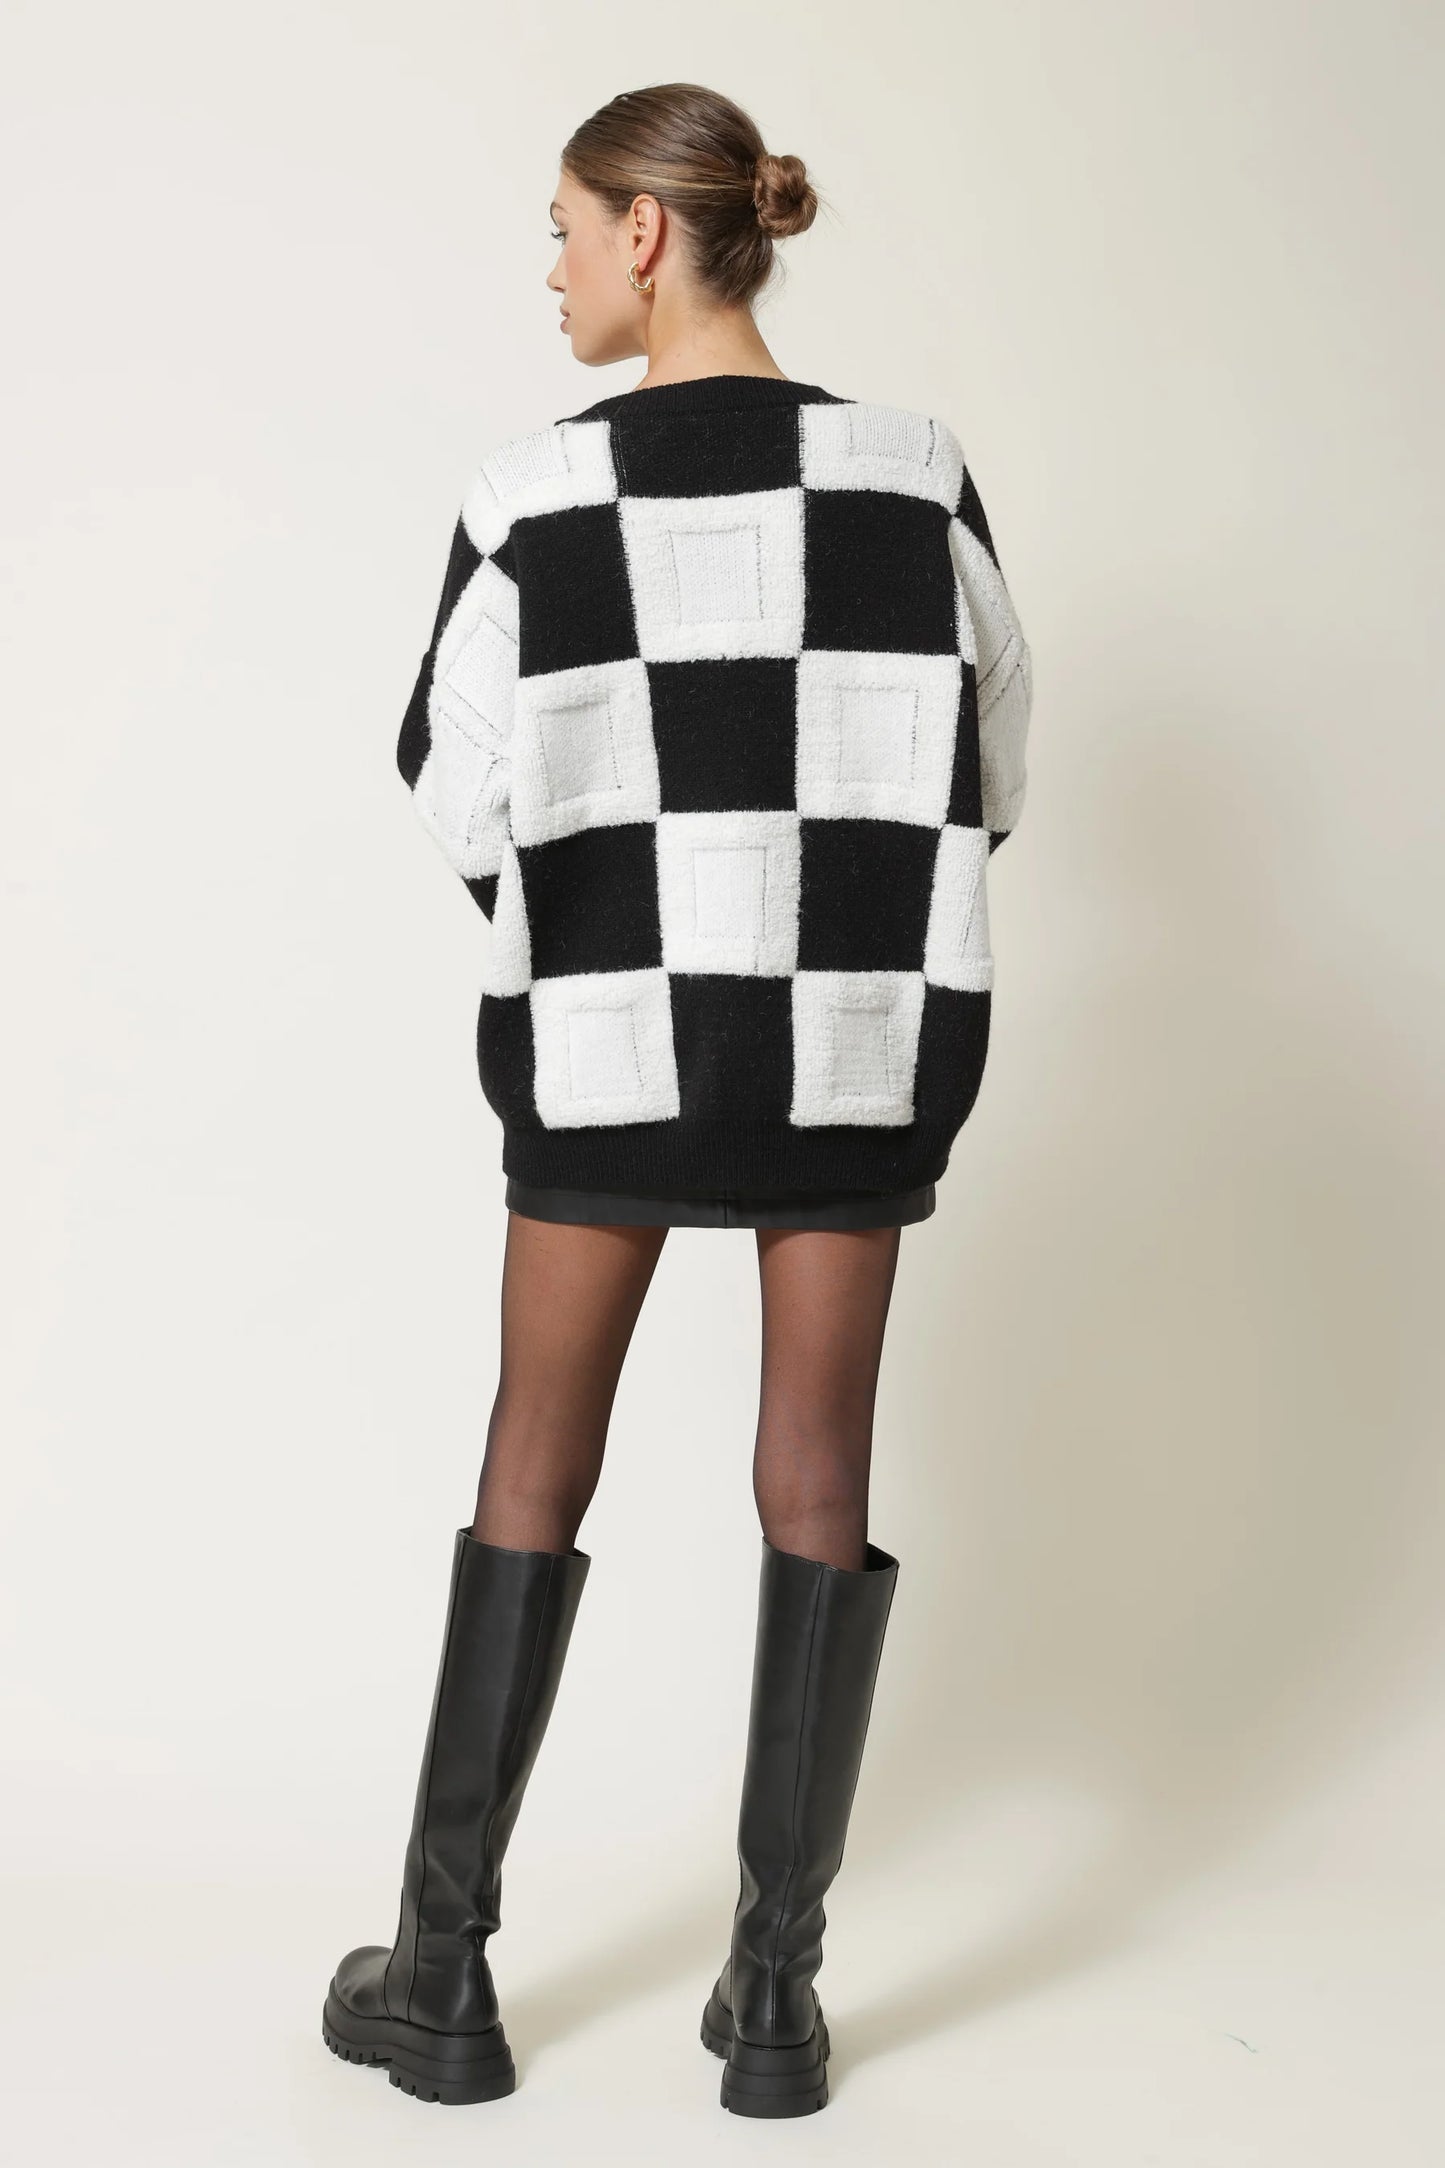 Jaque Black and White Square Sweater